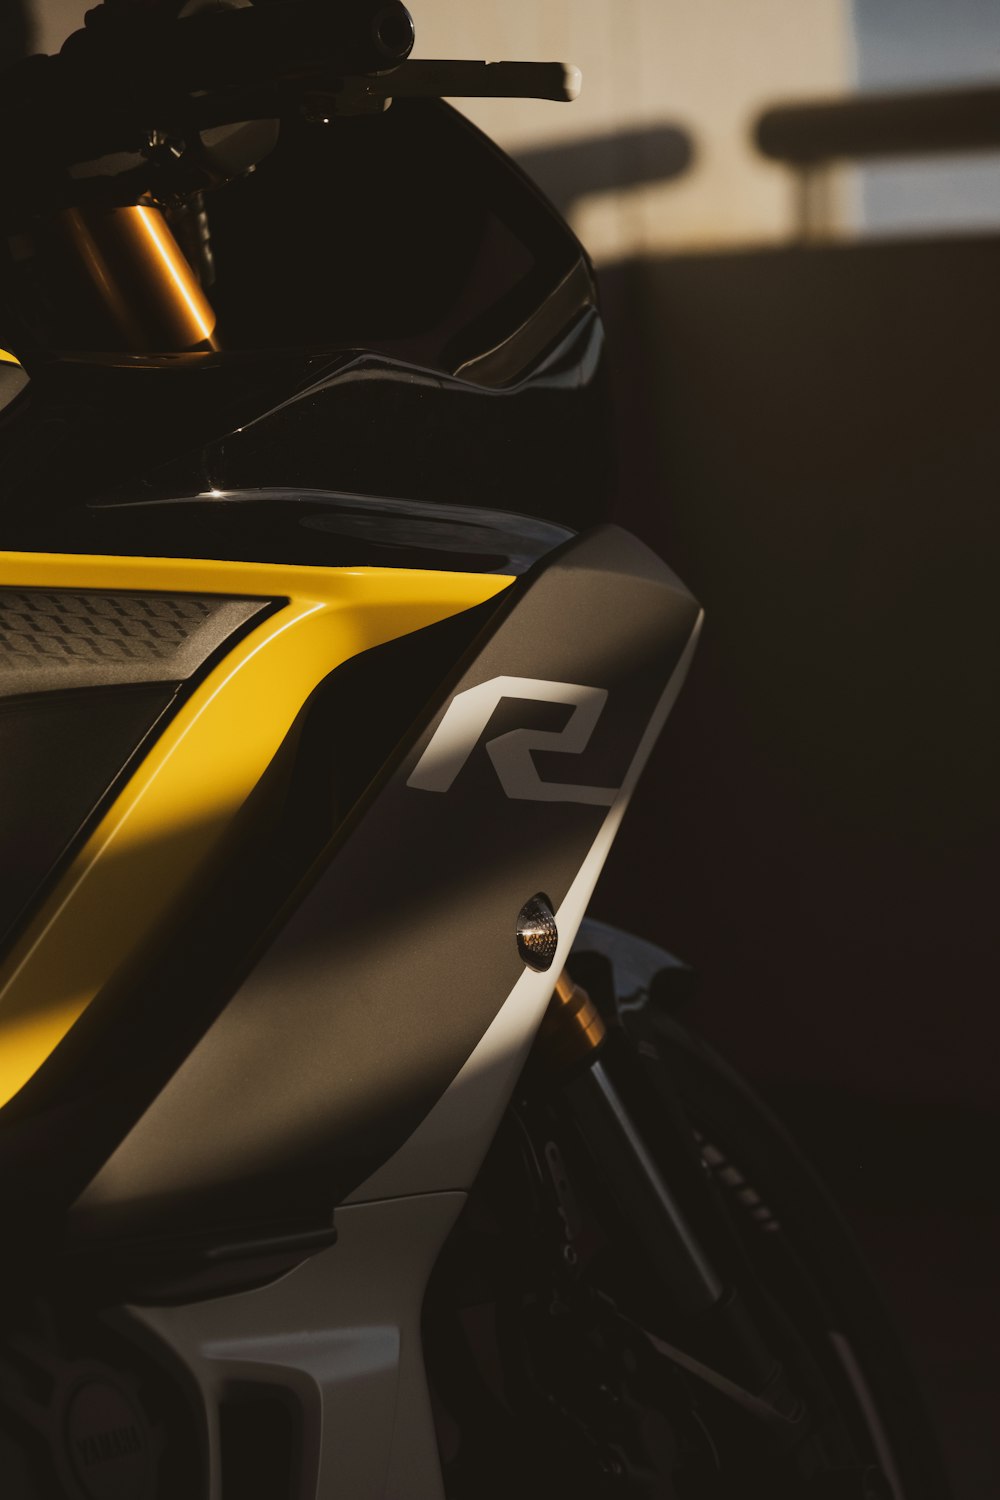 a close up of a yellow and black motorcycle